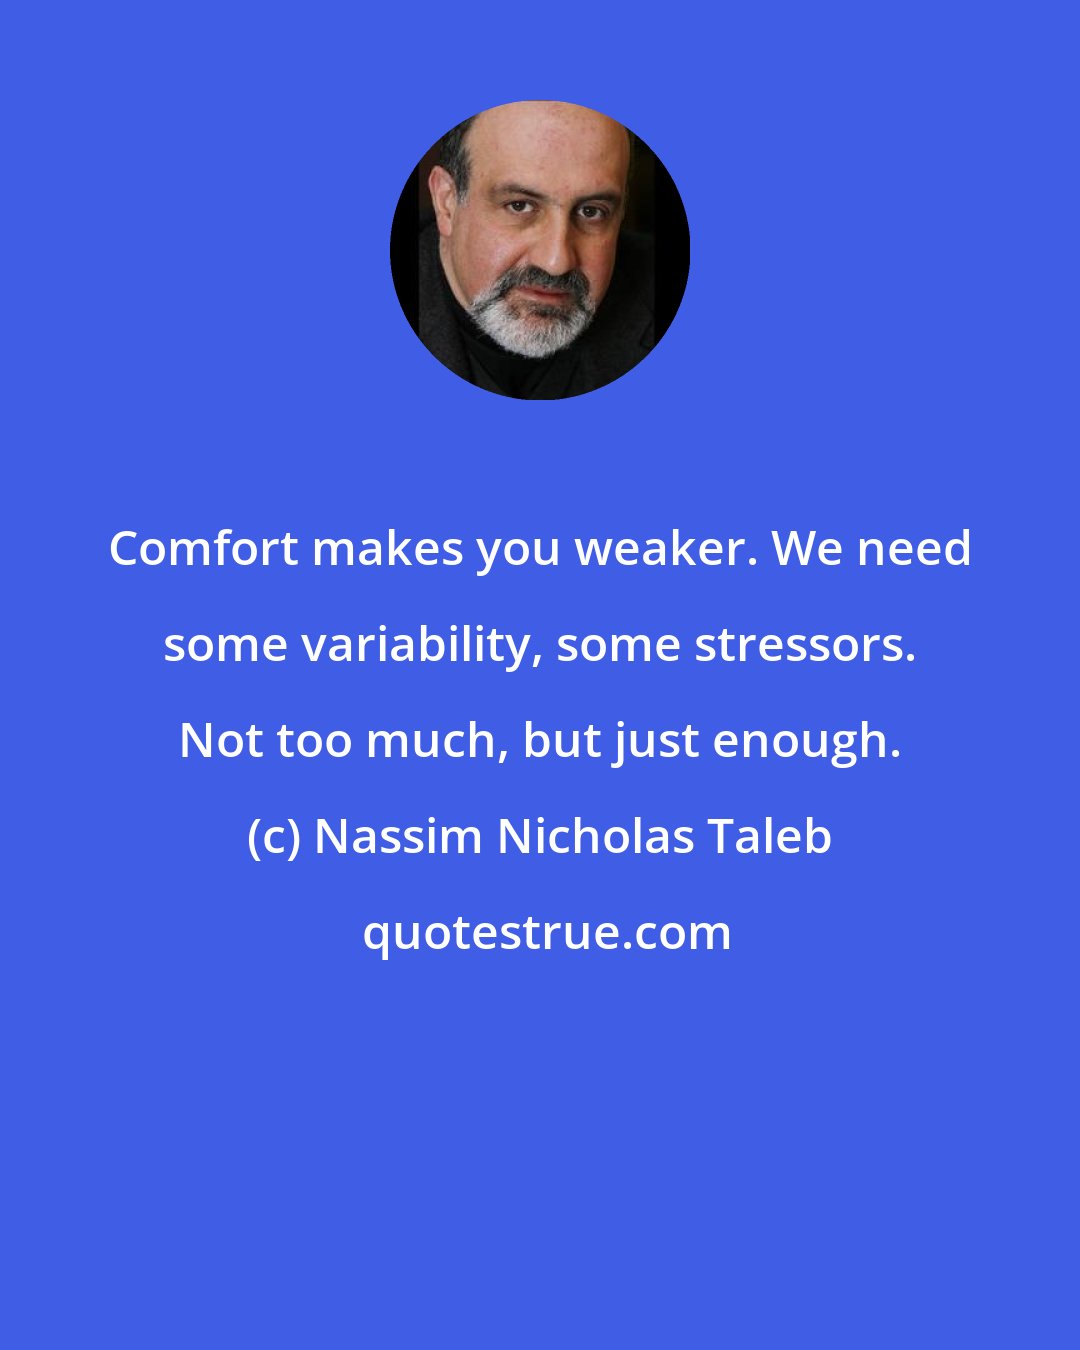 Nassim Nicholas Taleb: Comfort makes you weaker. We need some variability, some stressors. Not too much, but just enough.